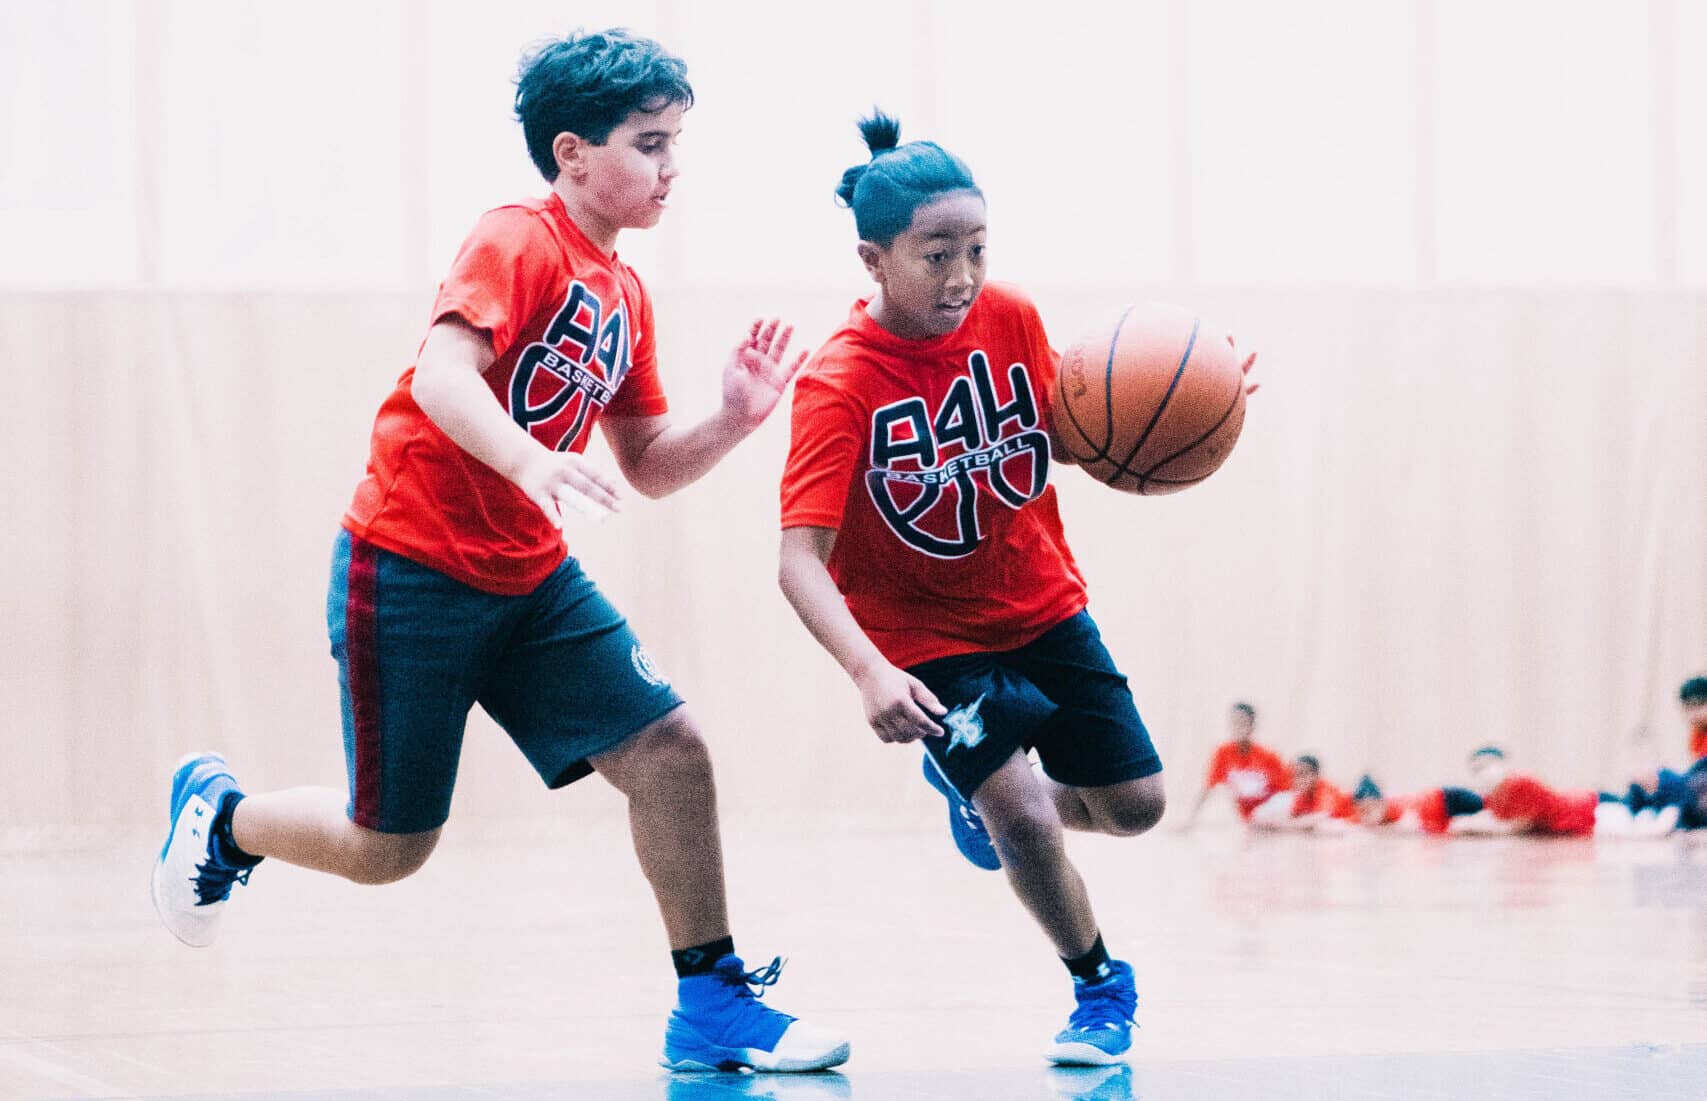 Two boys playing basketball at the A4H Sports camp